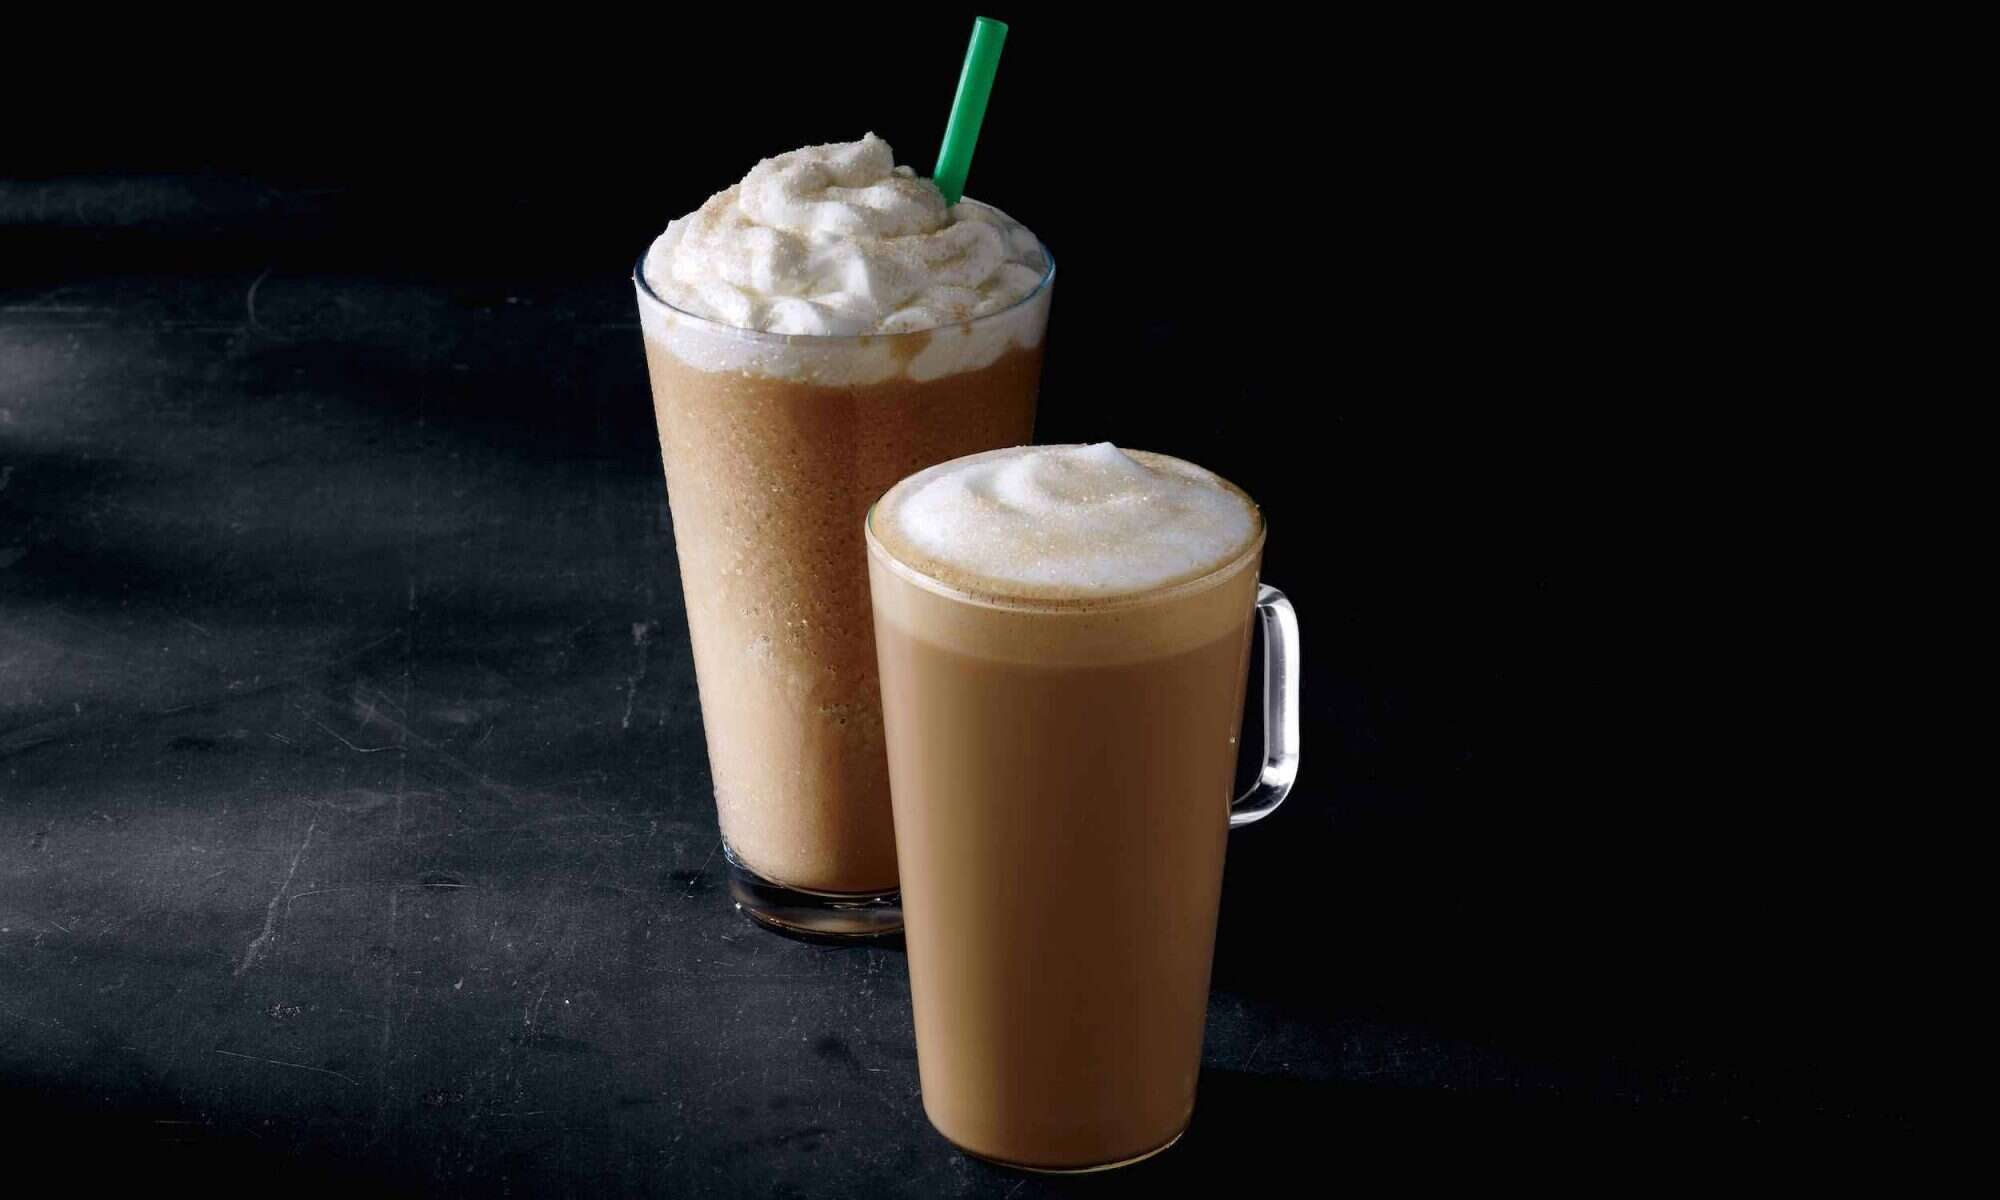 How to Make Cold Foam Like You Get at Starbucks